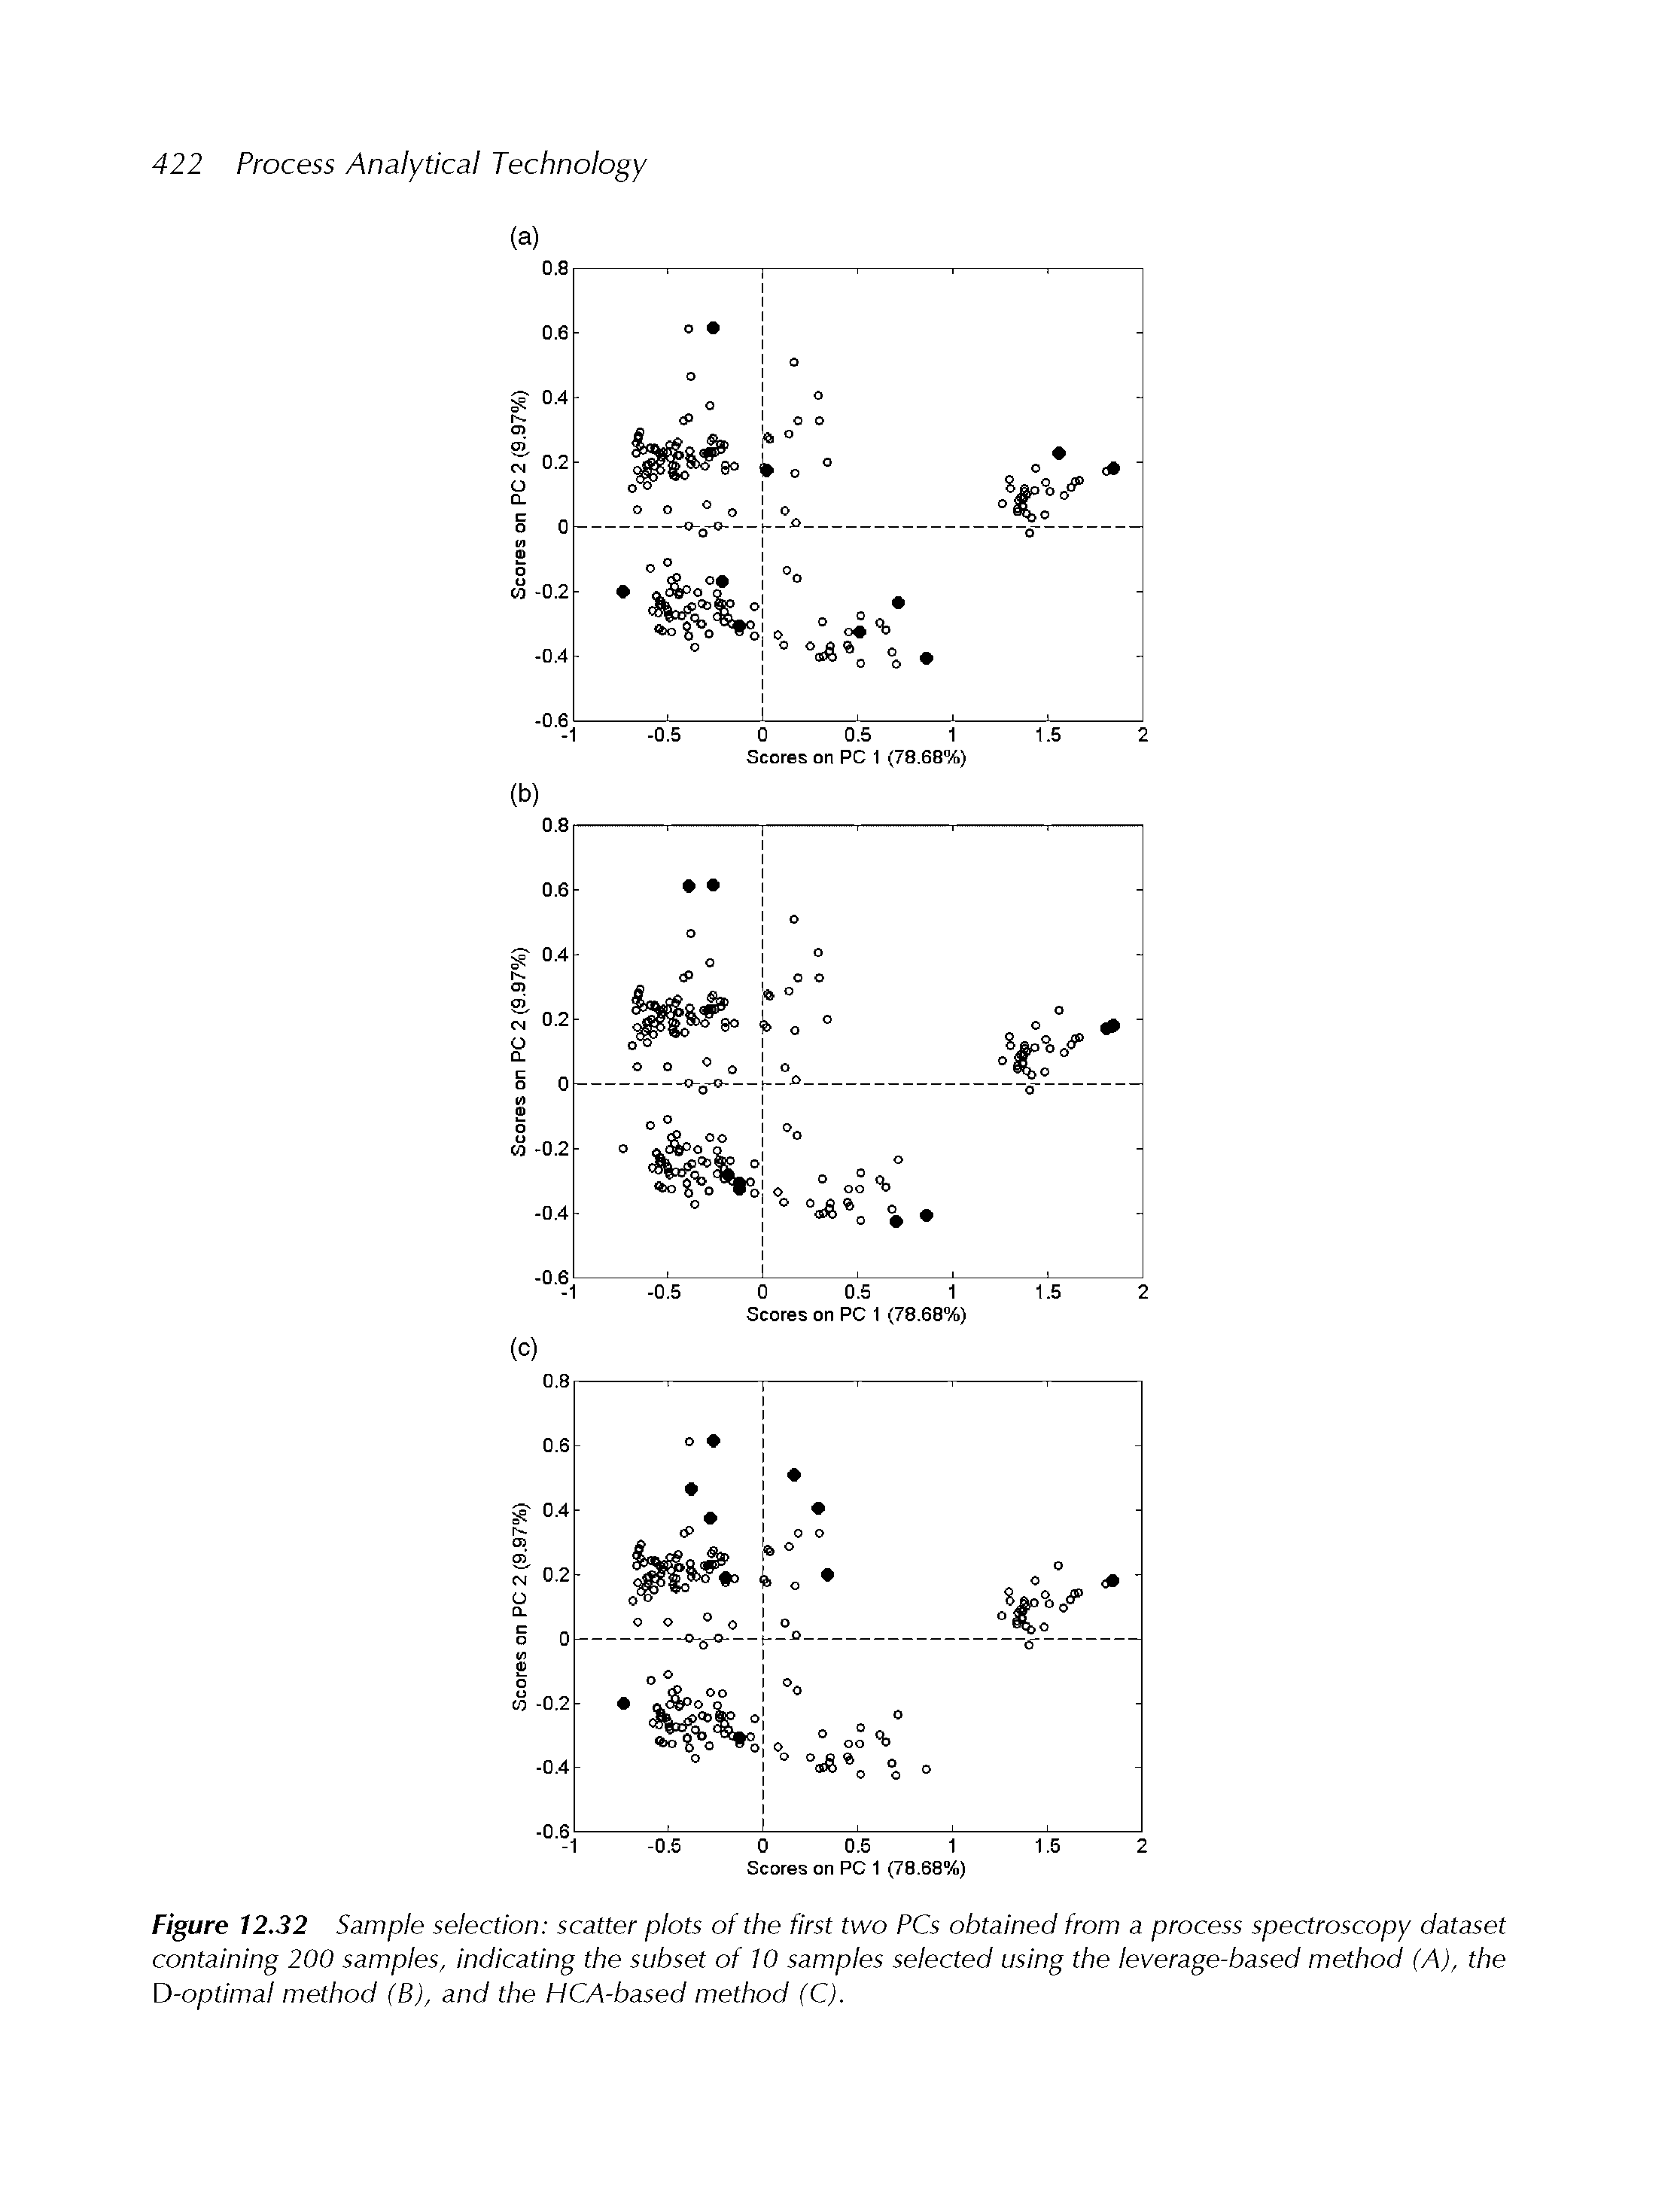 Figure 12.32 Sample selection scatter plots of the first two PCs obtained from a process spectroscopy dataset containing 200 samples, indicating the subset of 10 samples selected using the leverage-based method (A), the D-optimal method (B), and the ffCA-based method (C).